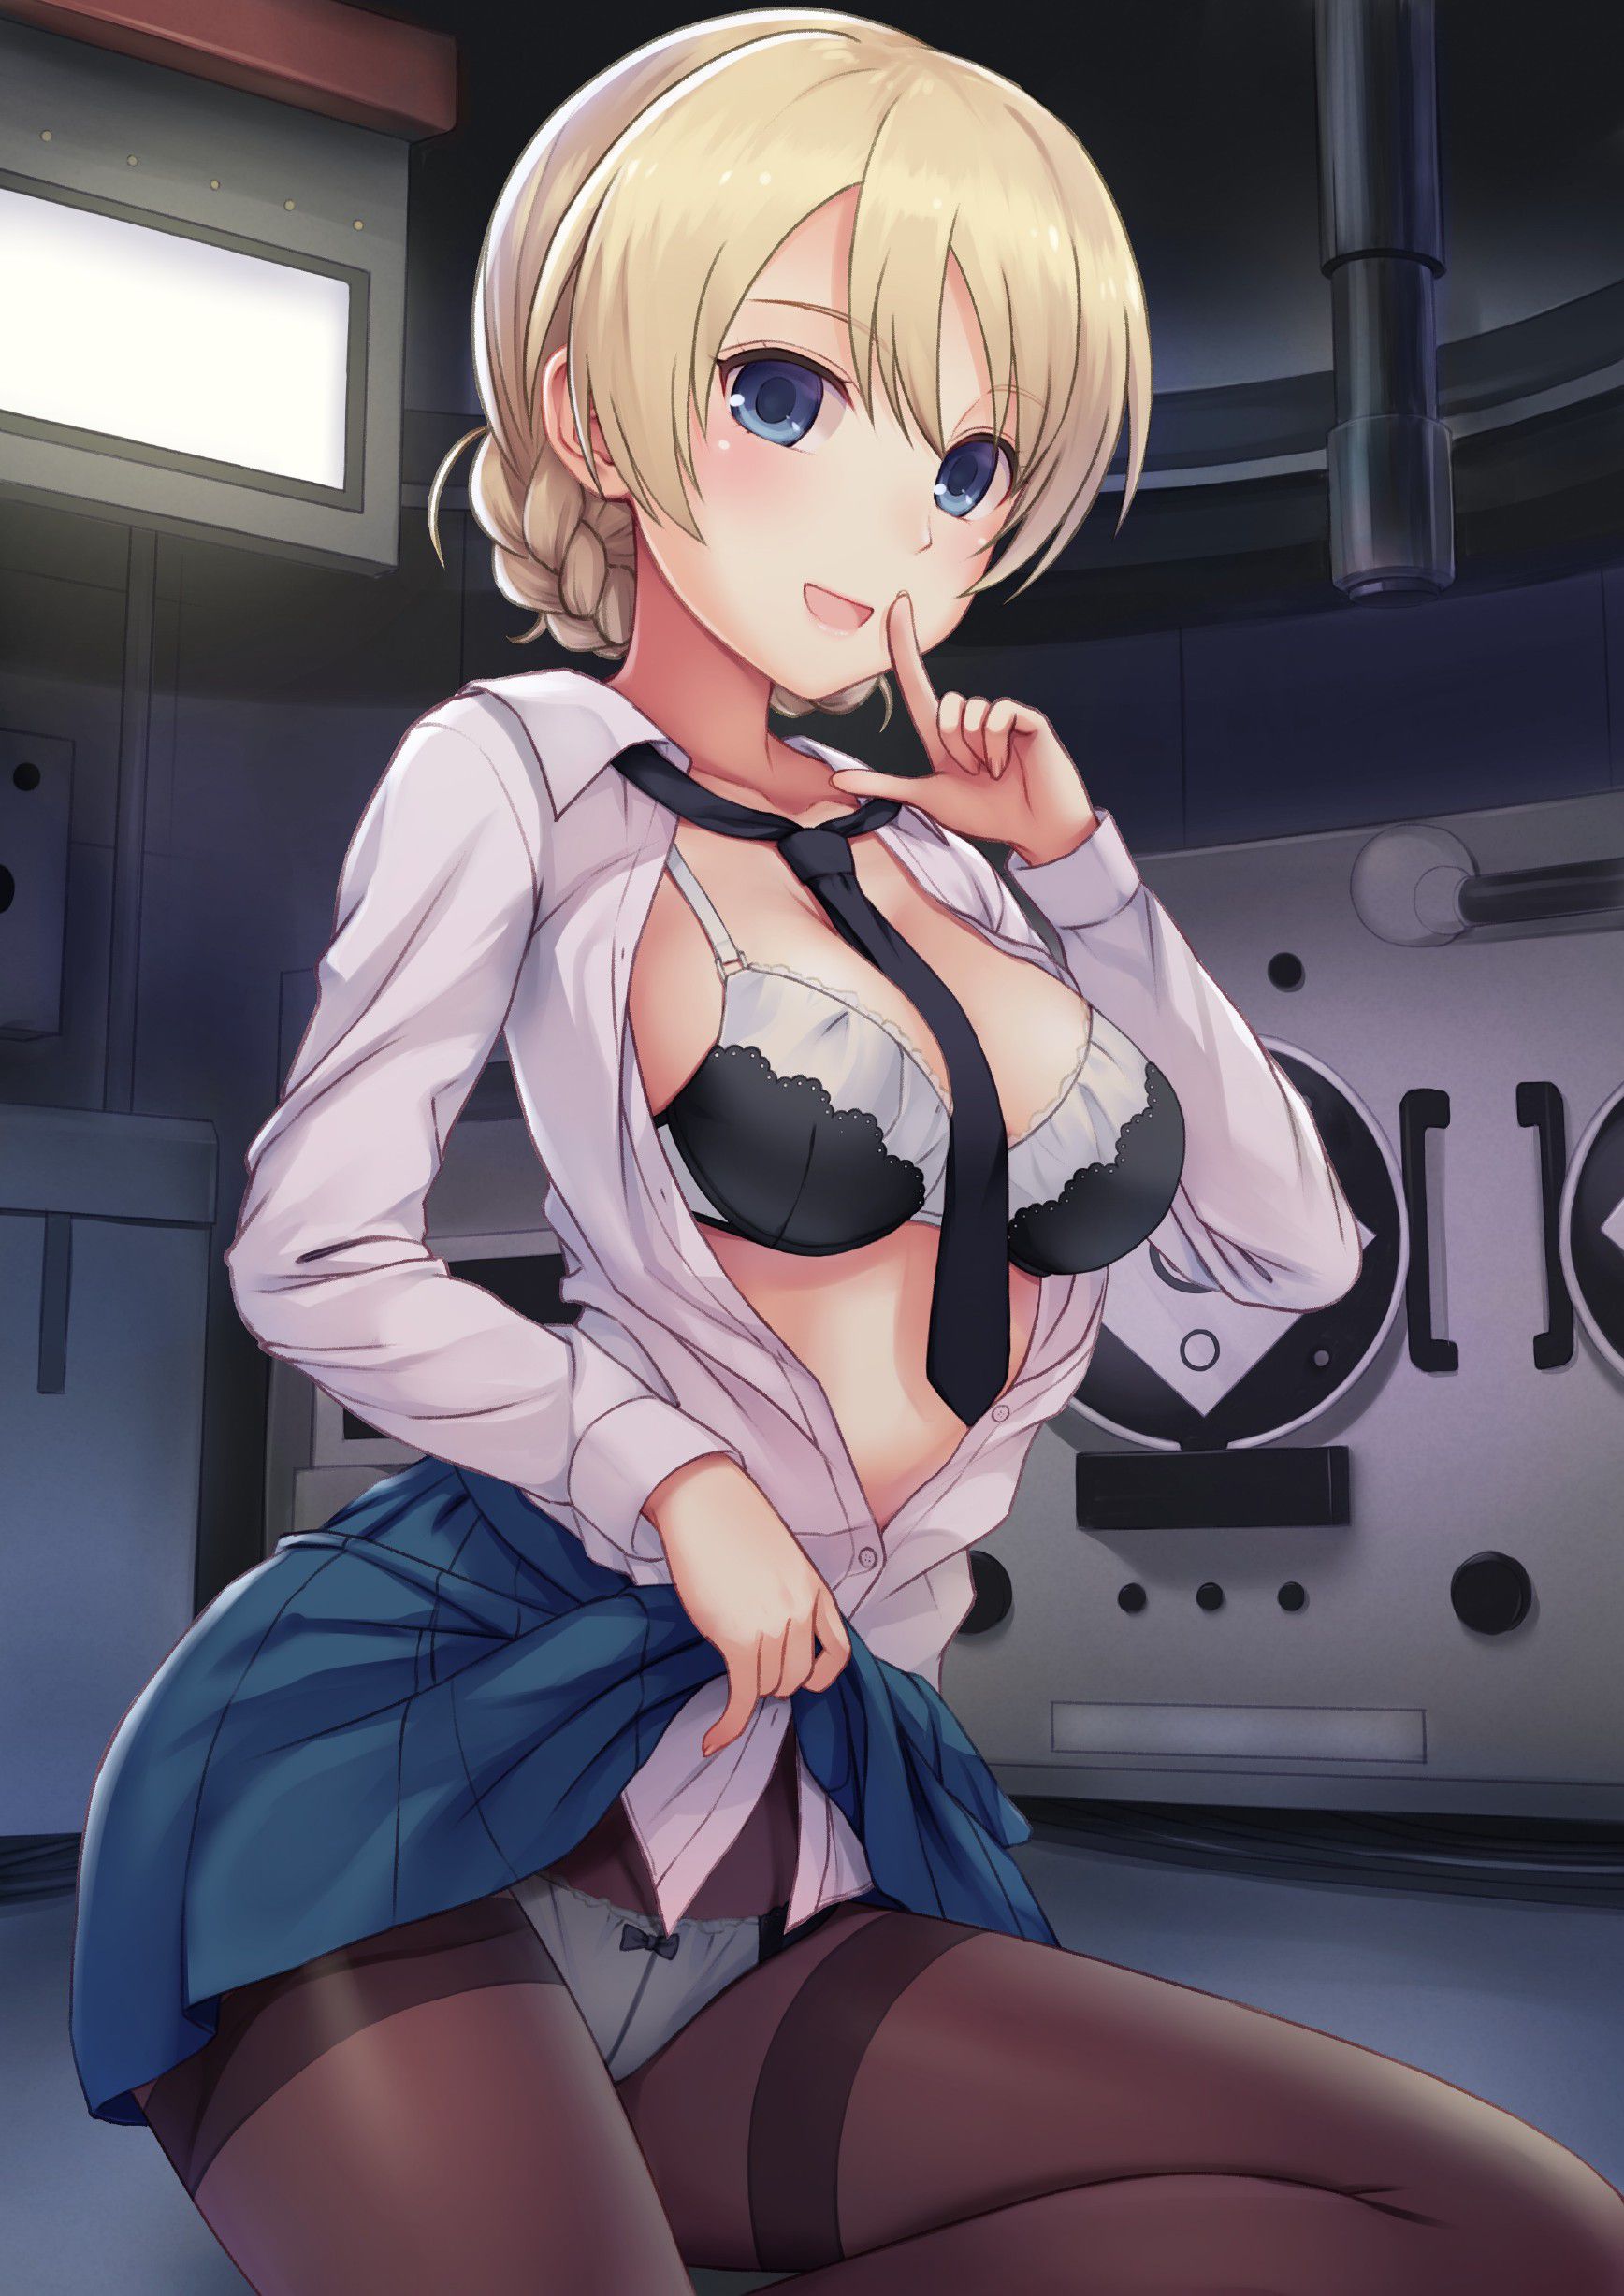 Erotic anime summary Erotic images of characters appearing in girls and Panzer [secondary erotic] 22